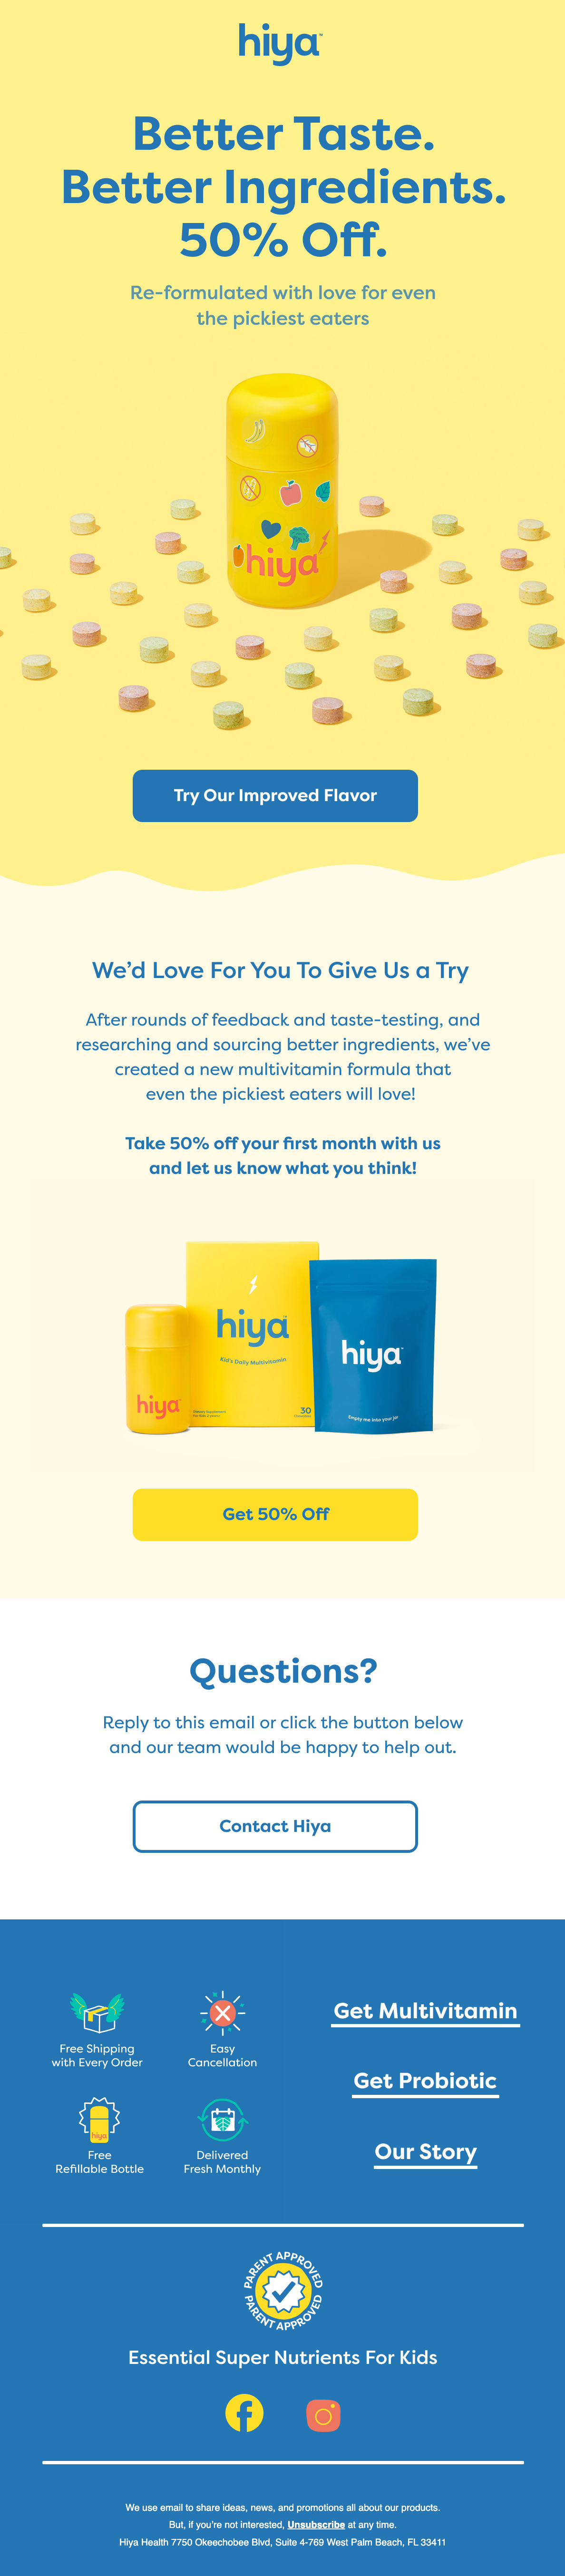 Product launch and discount email by Hiya